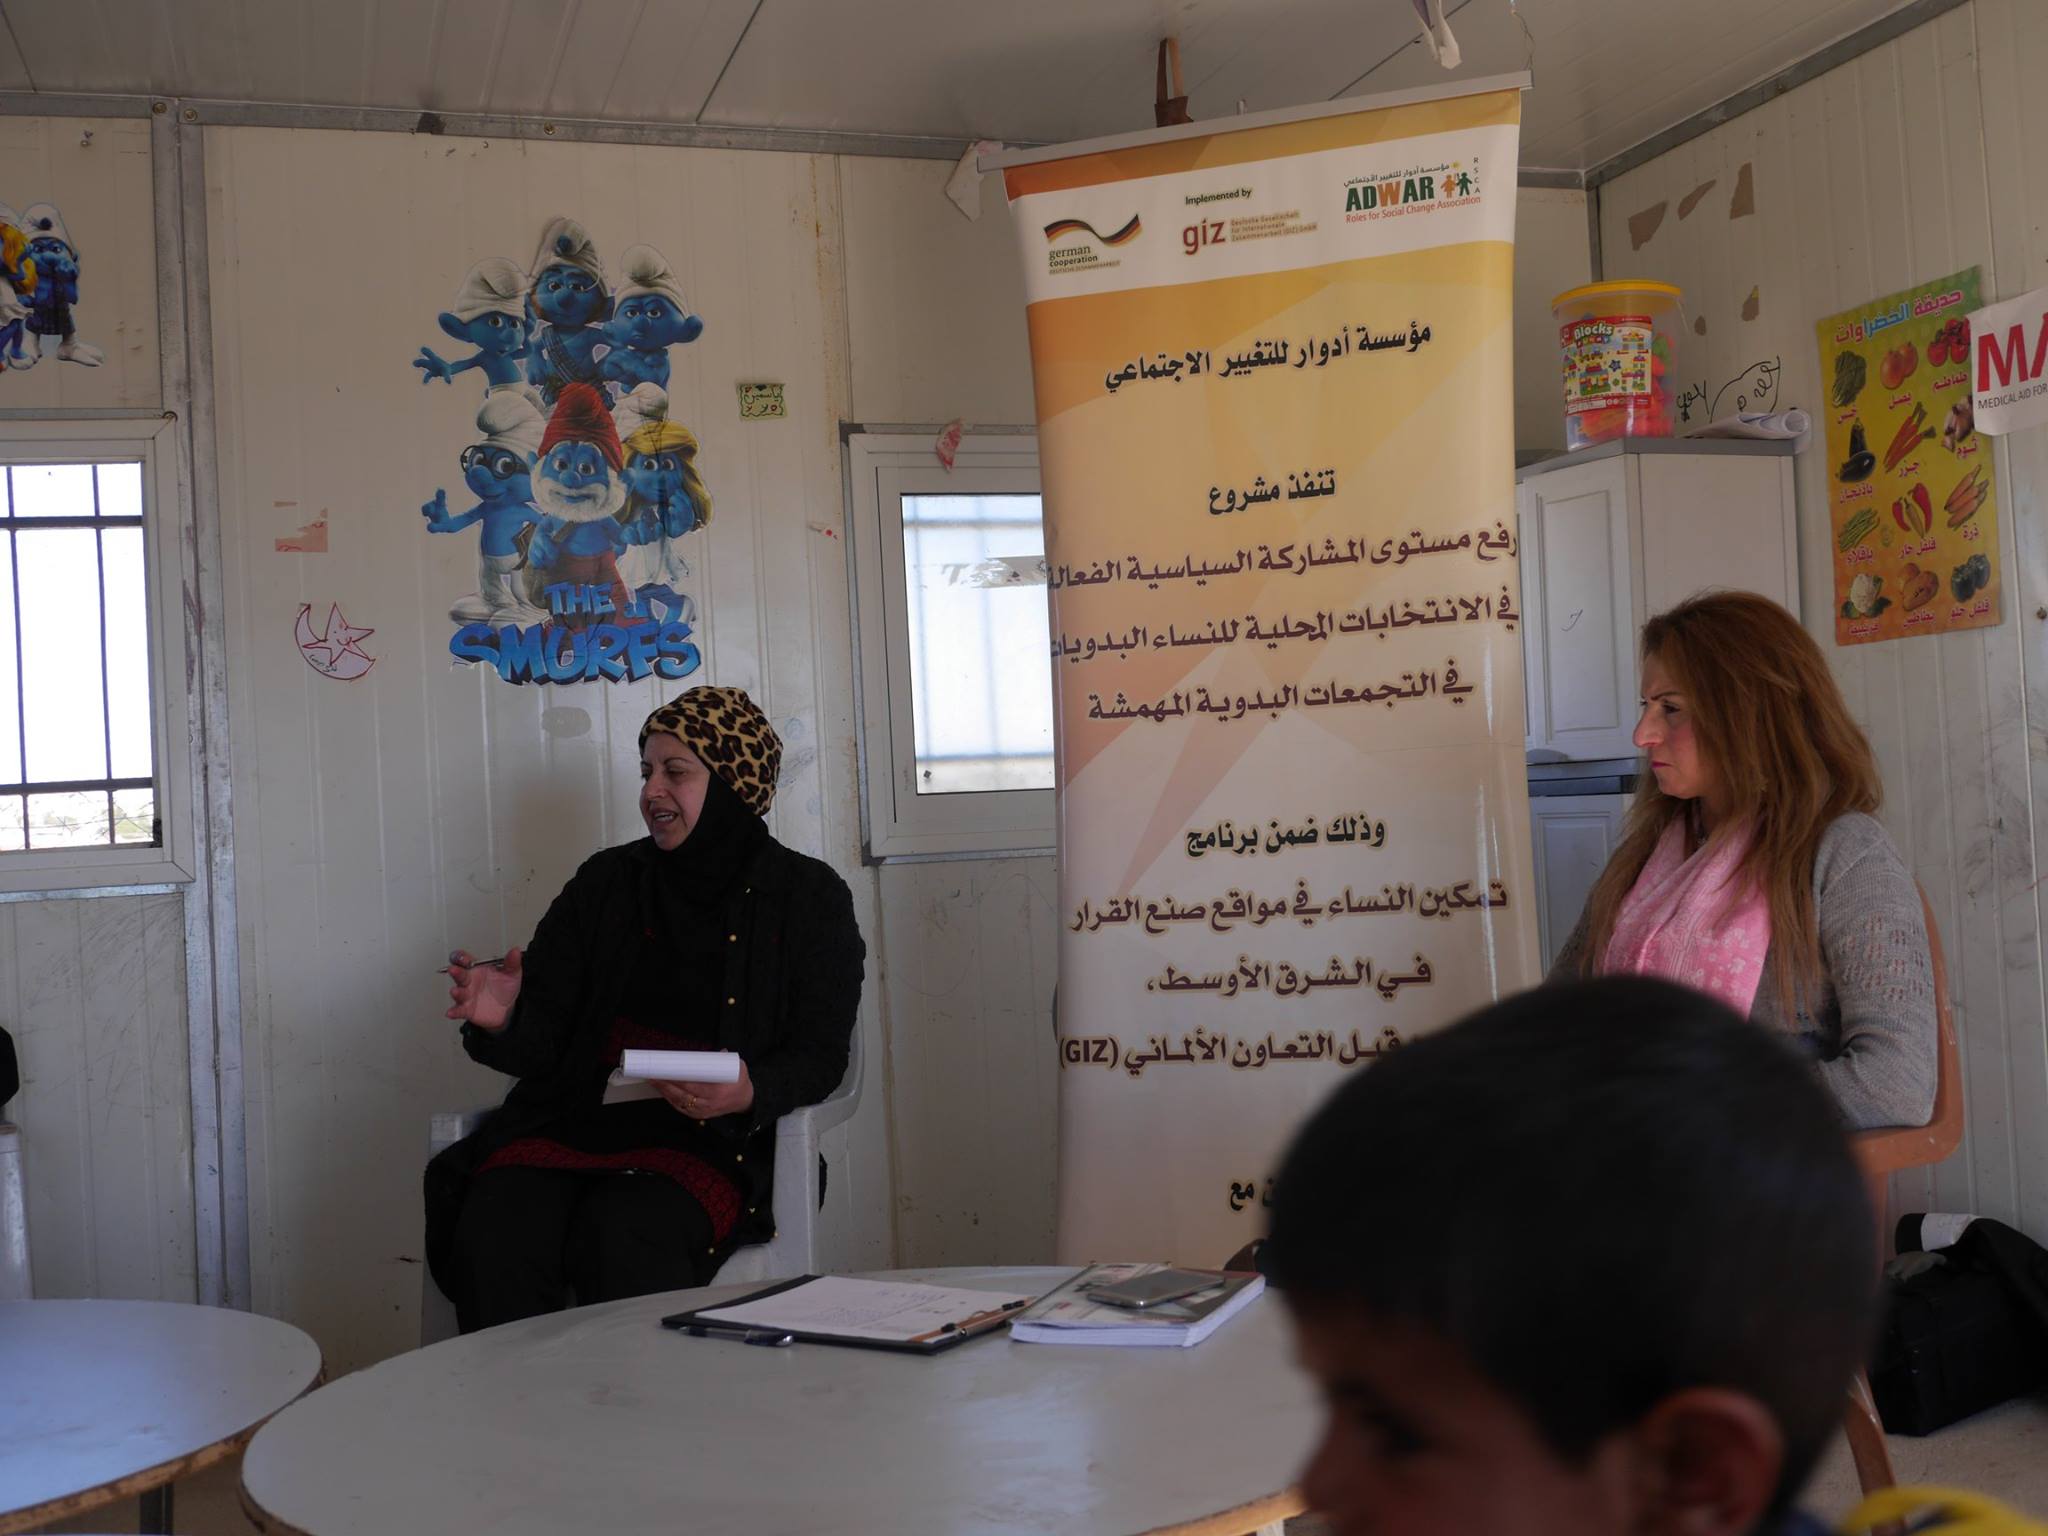  ADWAR continues implementing the project (Increasing Women’s Political Participation Through Effective local election)